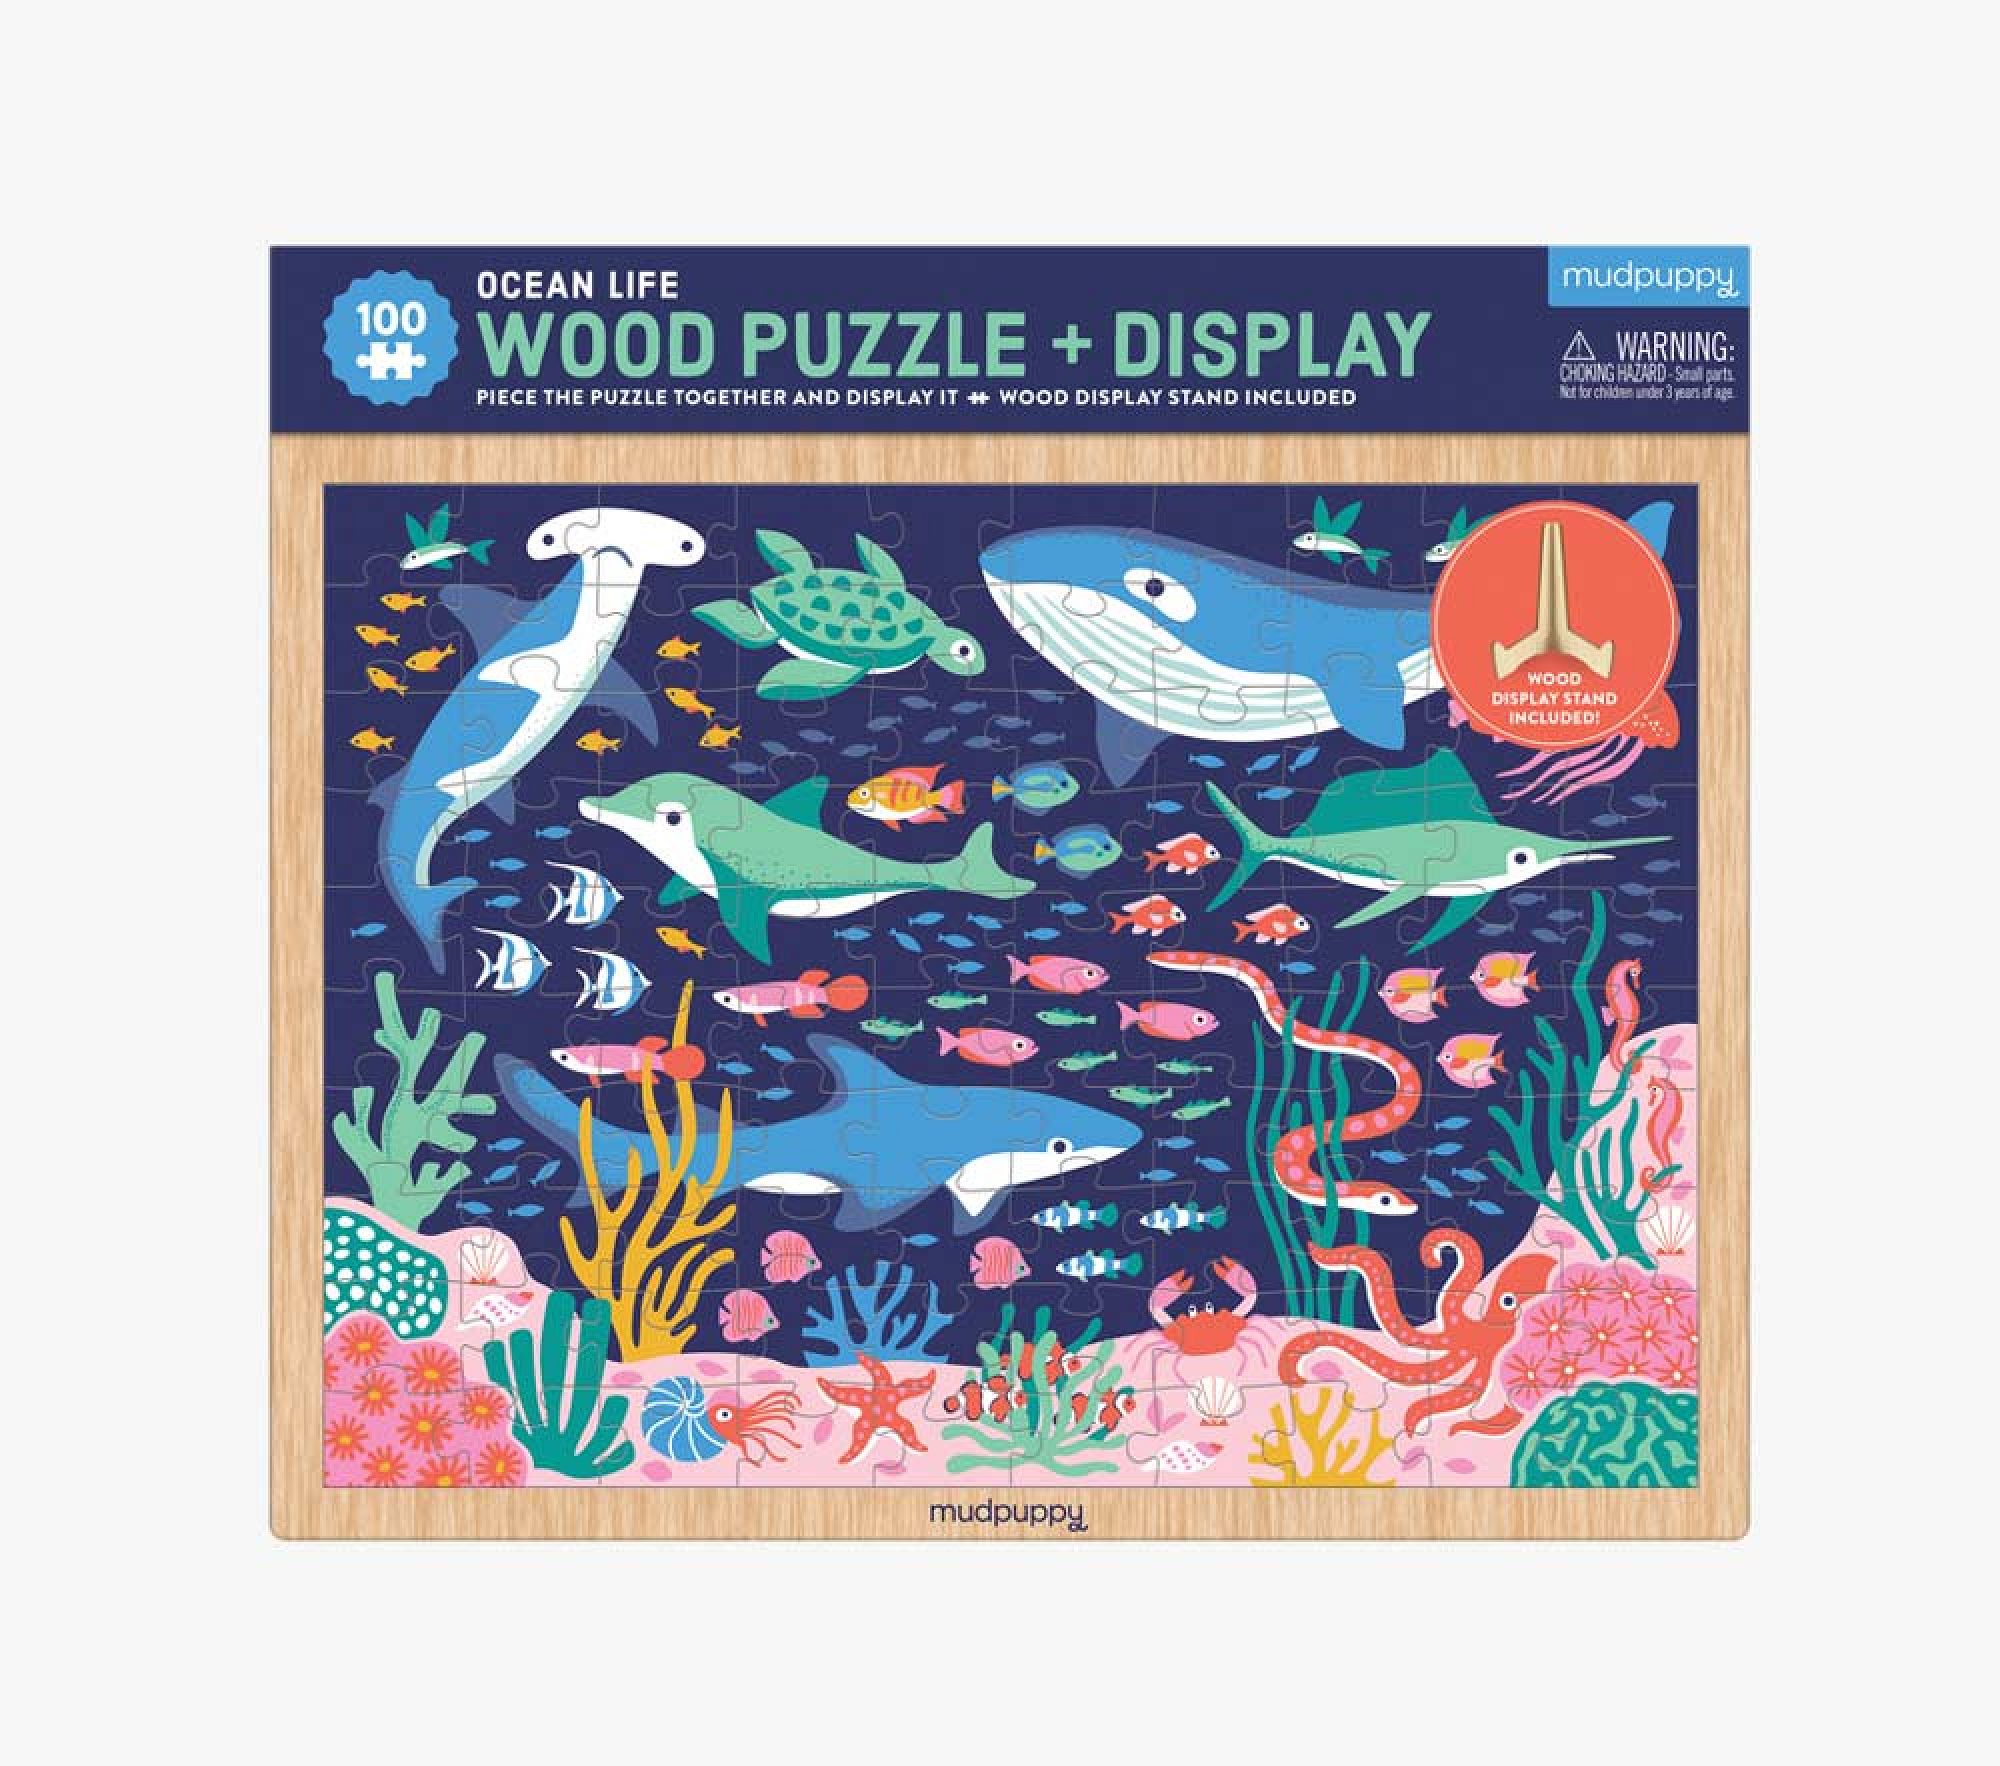 potterybarnkids.com | Ocean Life Wooden Puzzle